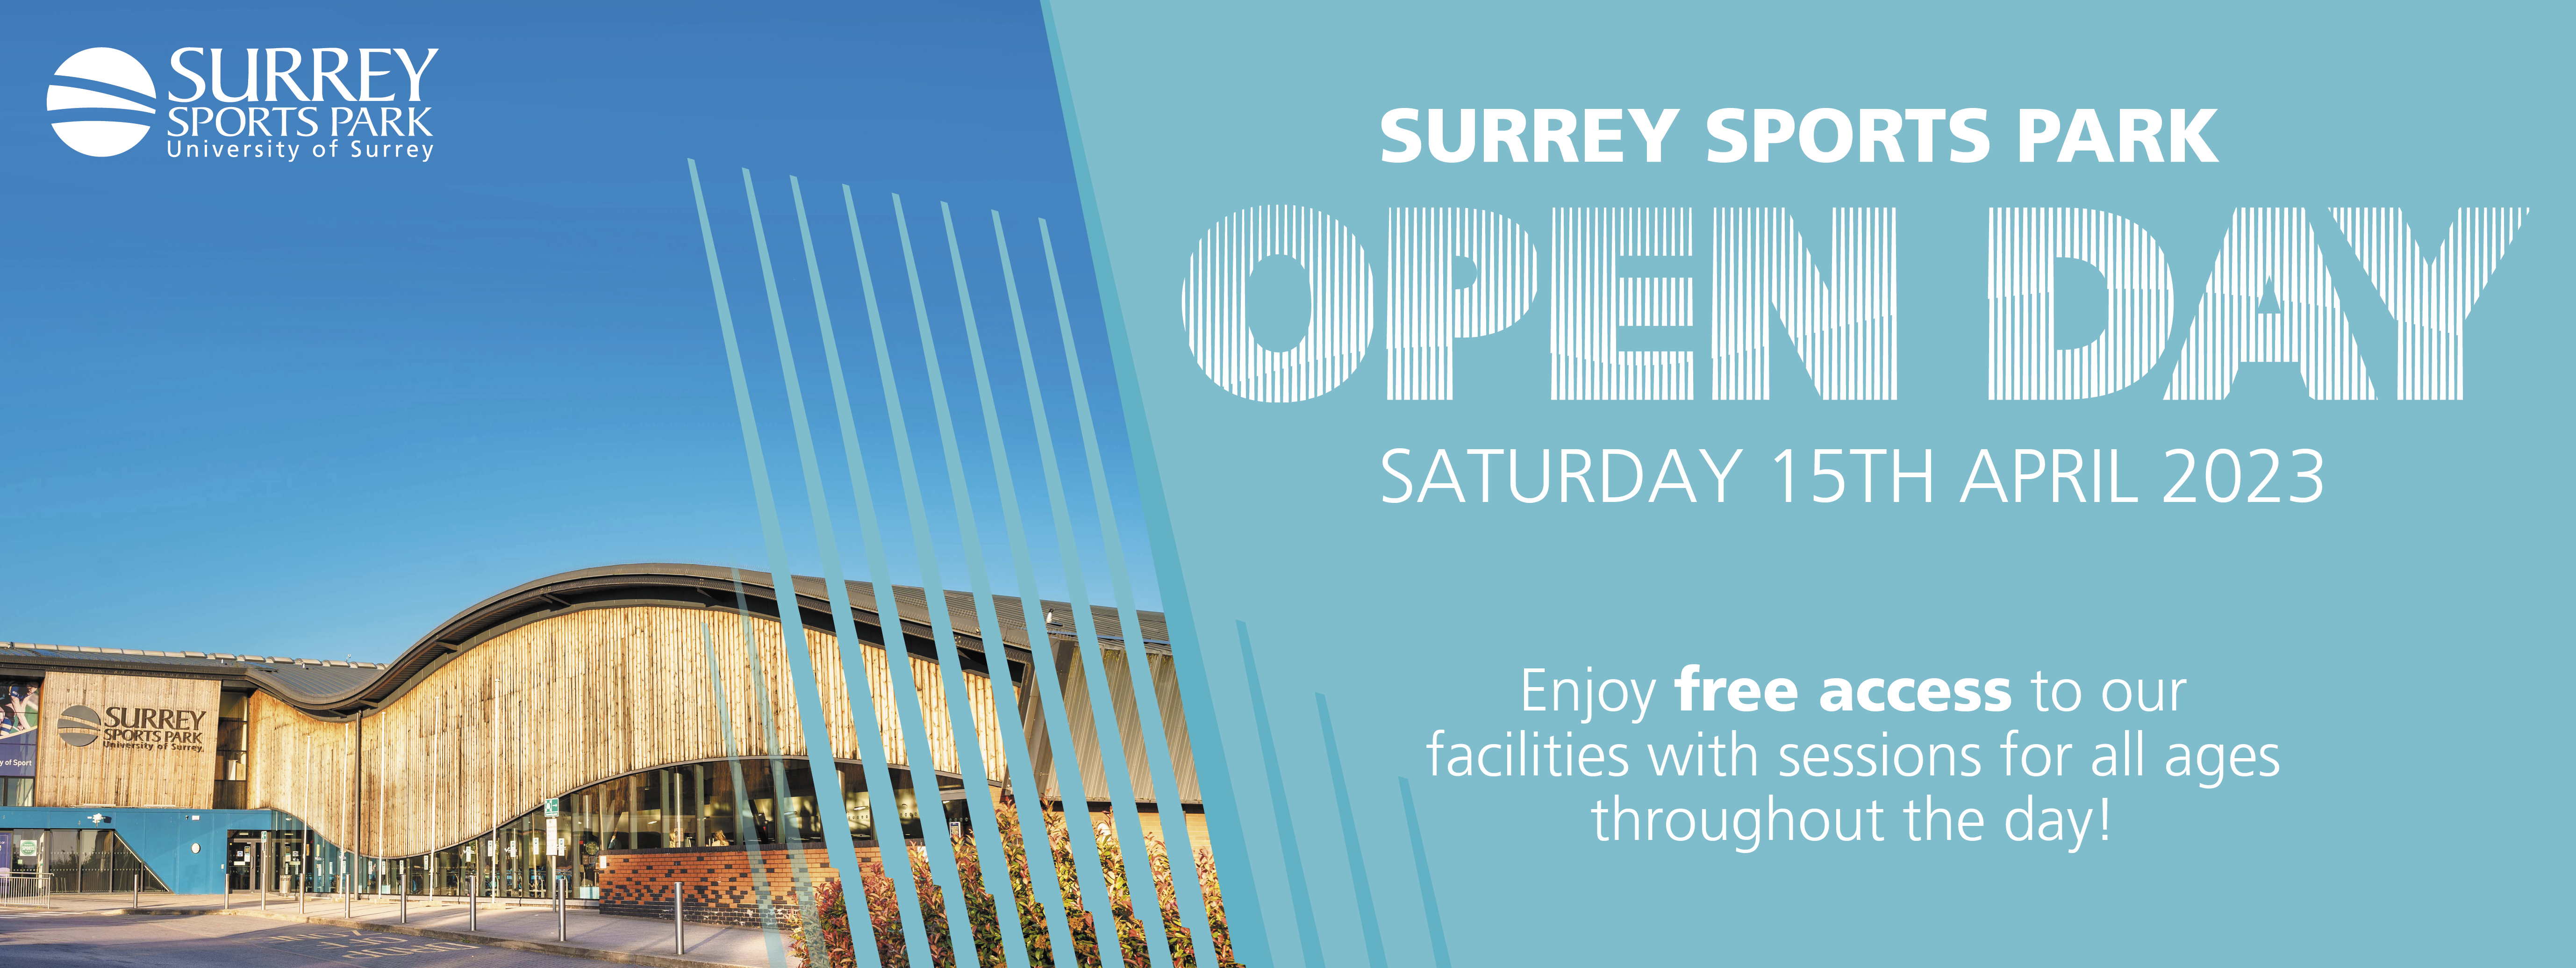 SSP to host Open Day on Saturday 15th April 2023!